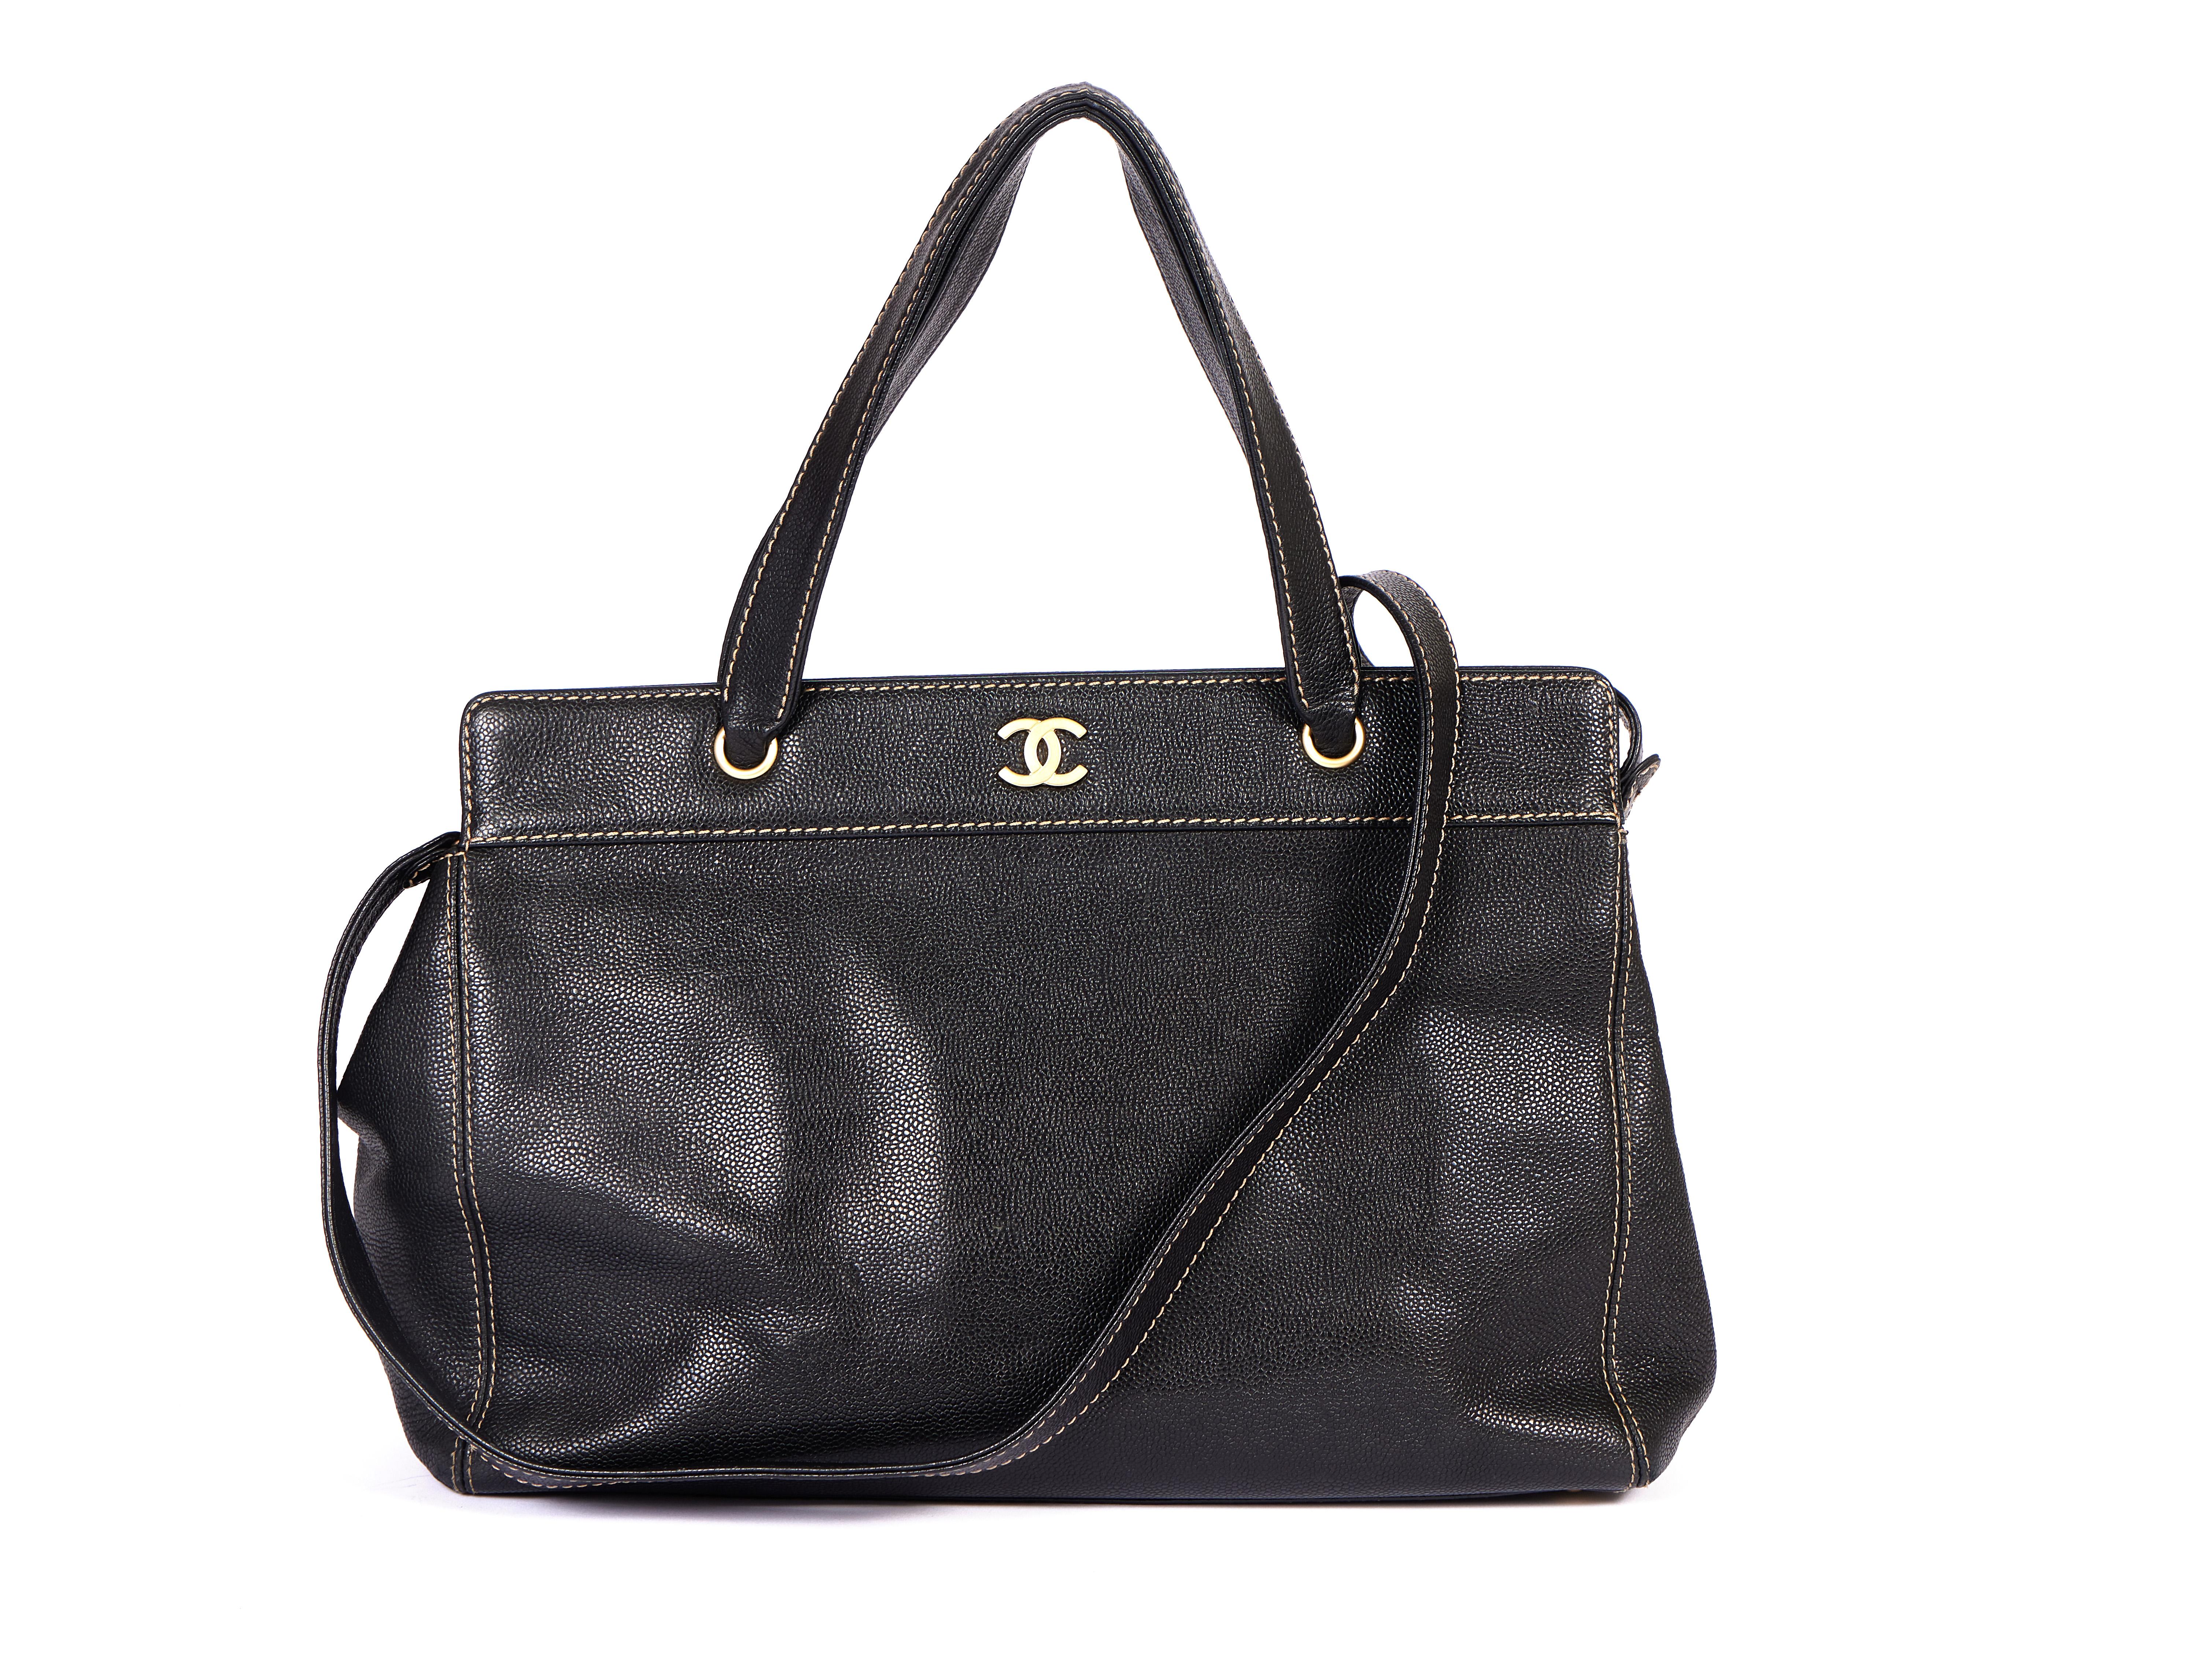 This Chanel Caviar leather bag comes in classic black and is perfect for everyday. It has handles as well as a cross body leather strap which can be attached. According to the hologram number the bag is form the era 2002 to 2005. Comes with generic